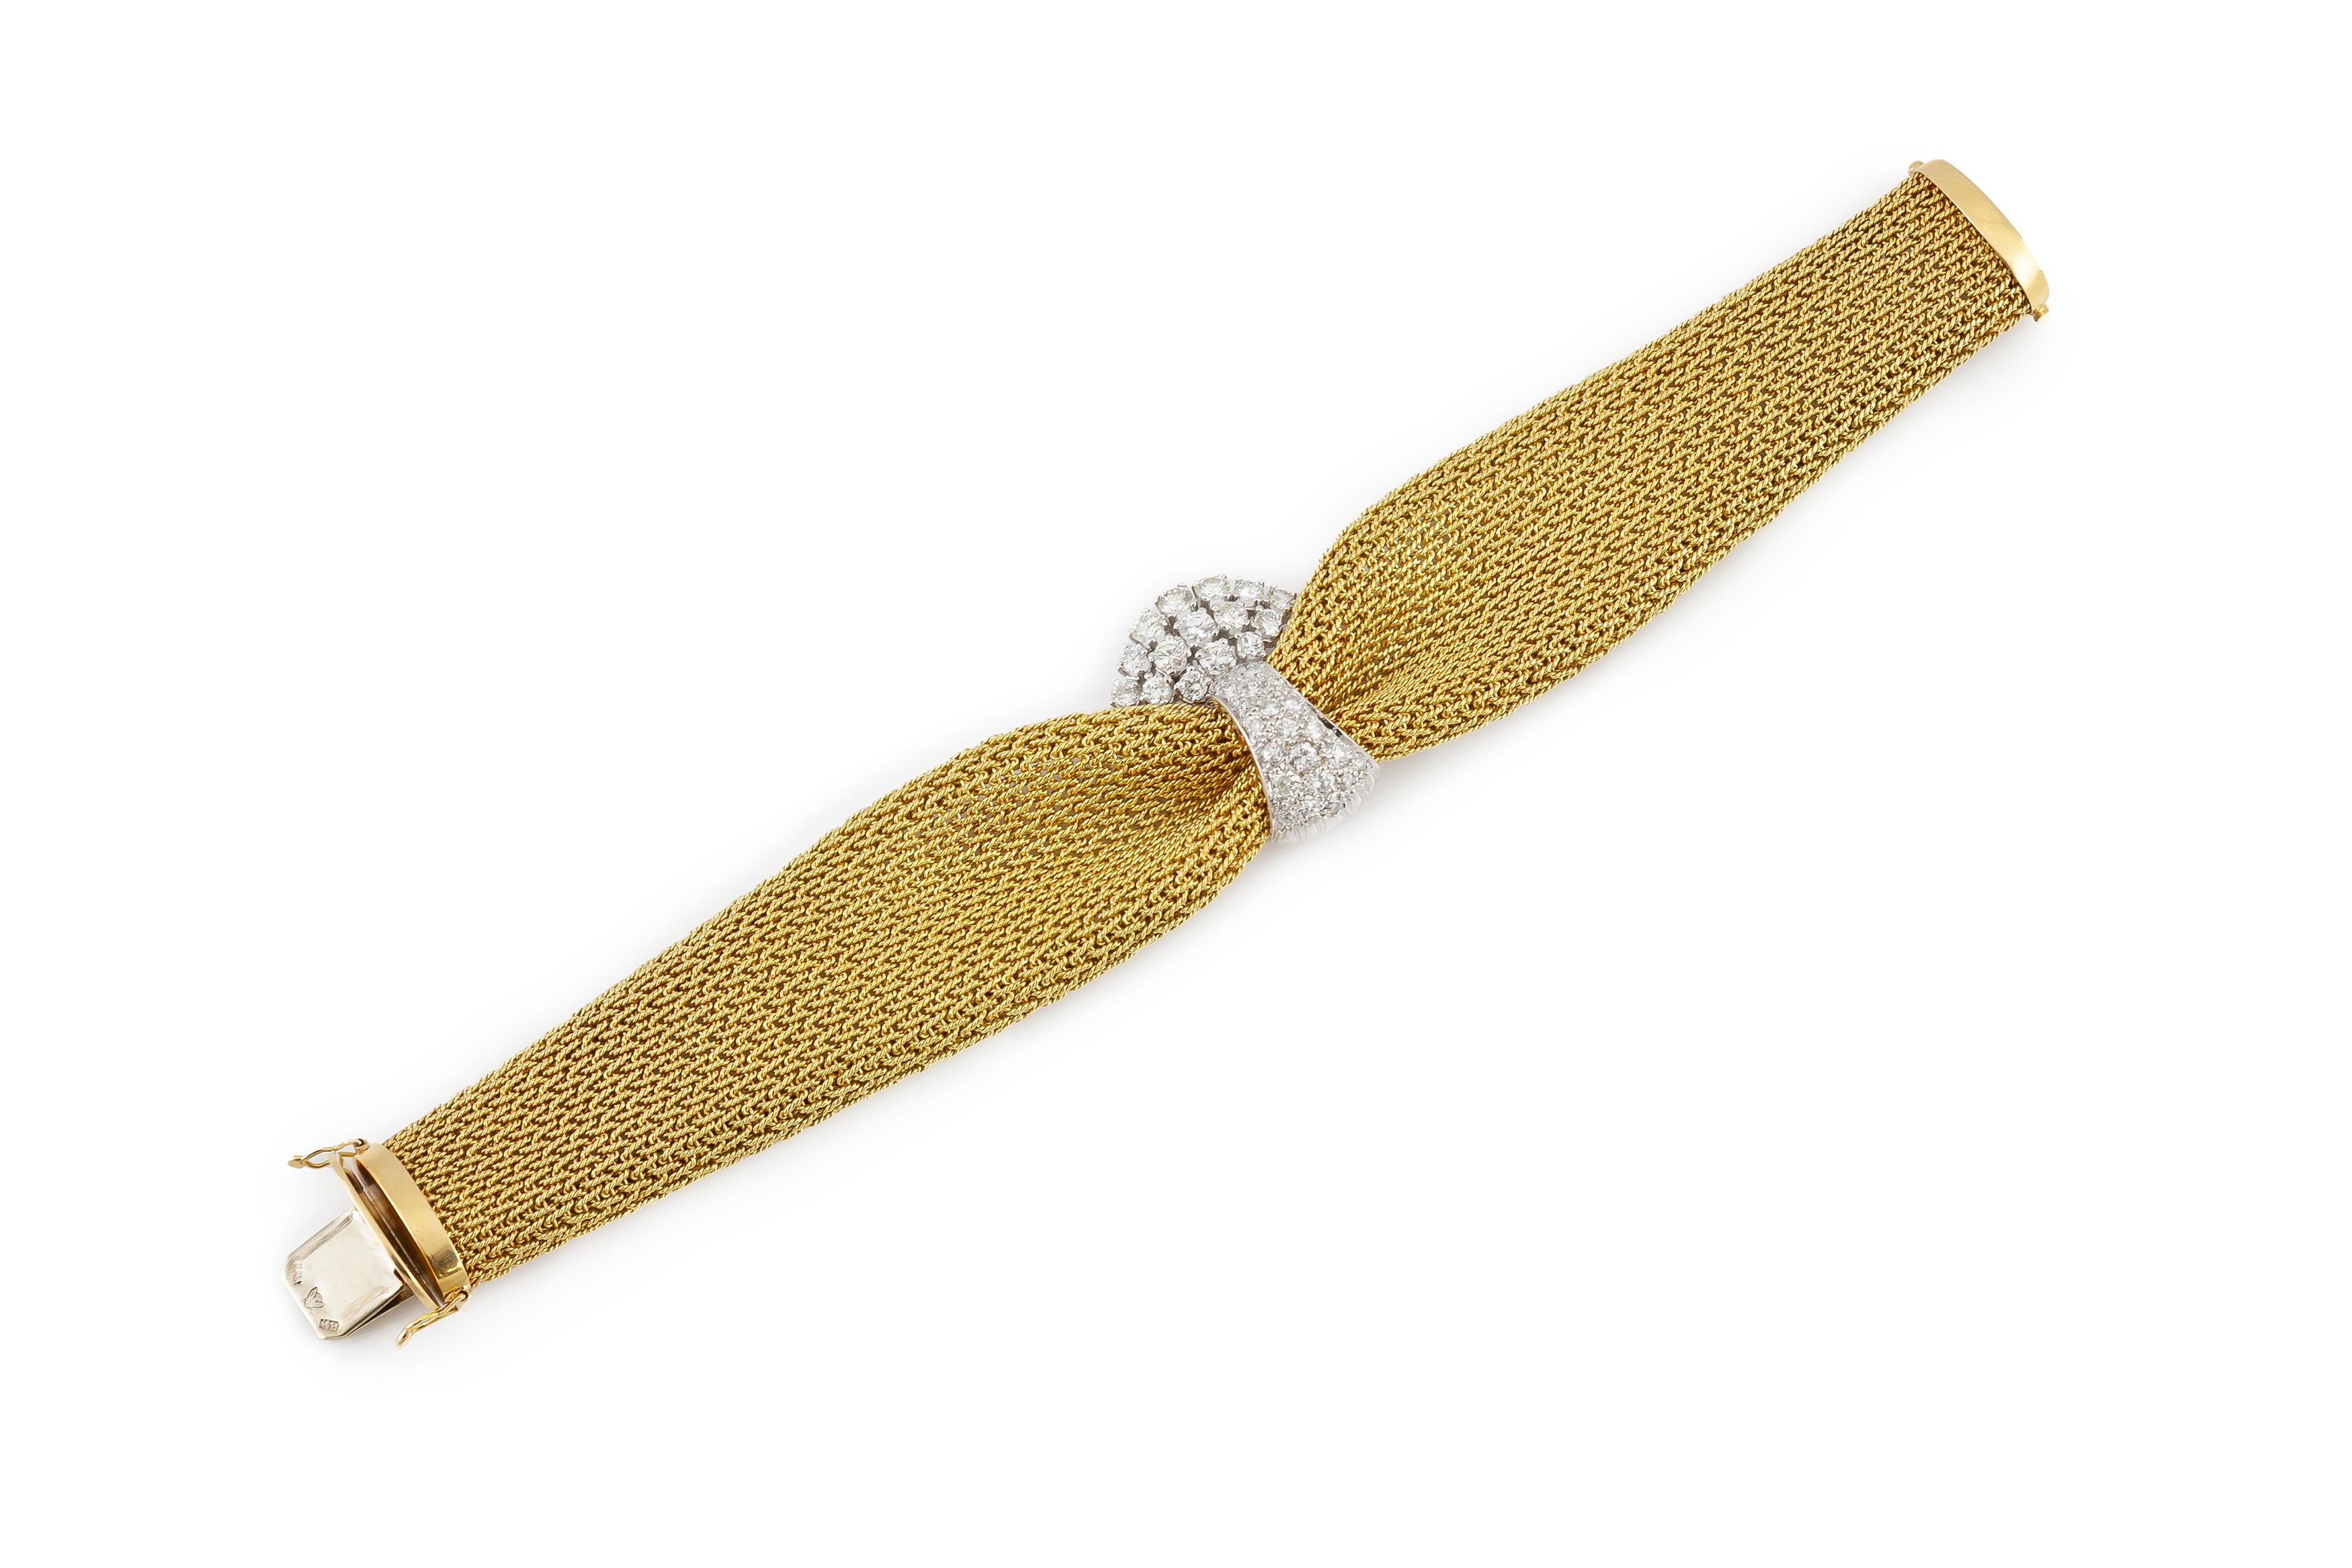 The bracelet is finely crafted in 18k yellow gold with with 2.50 carat center diamonds .